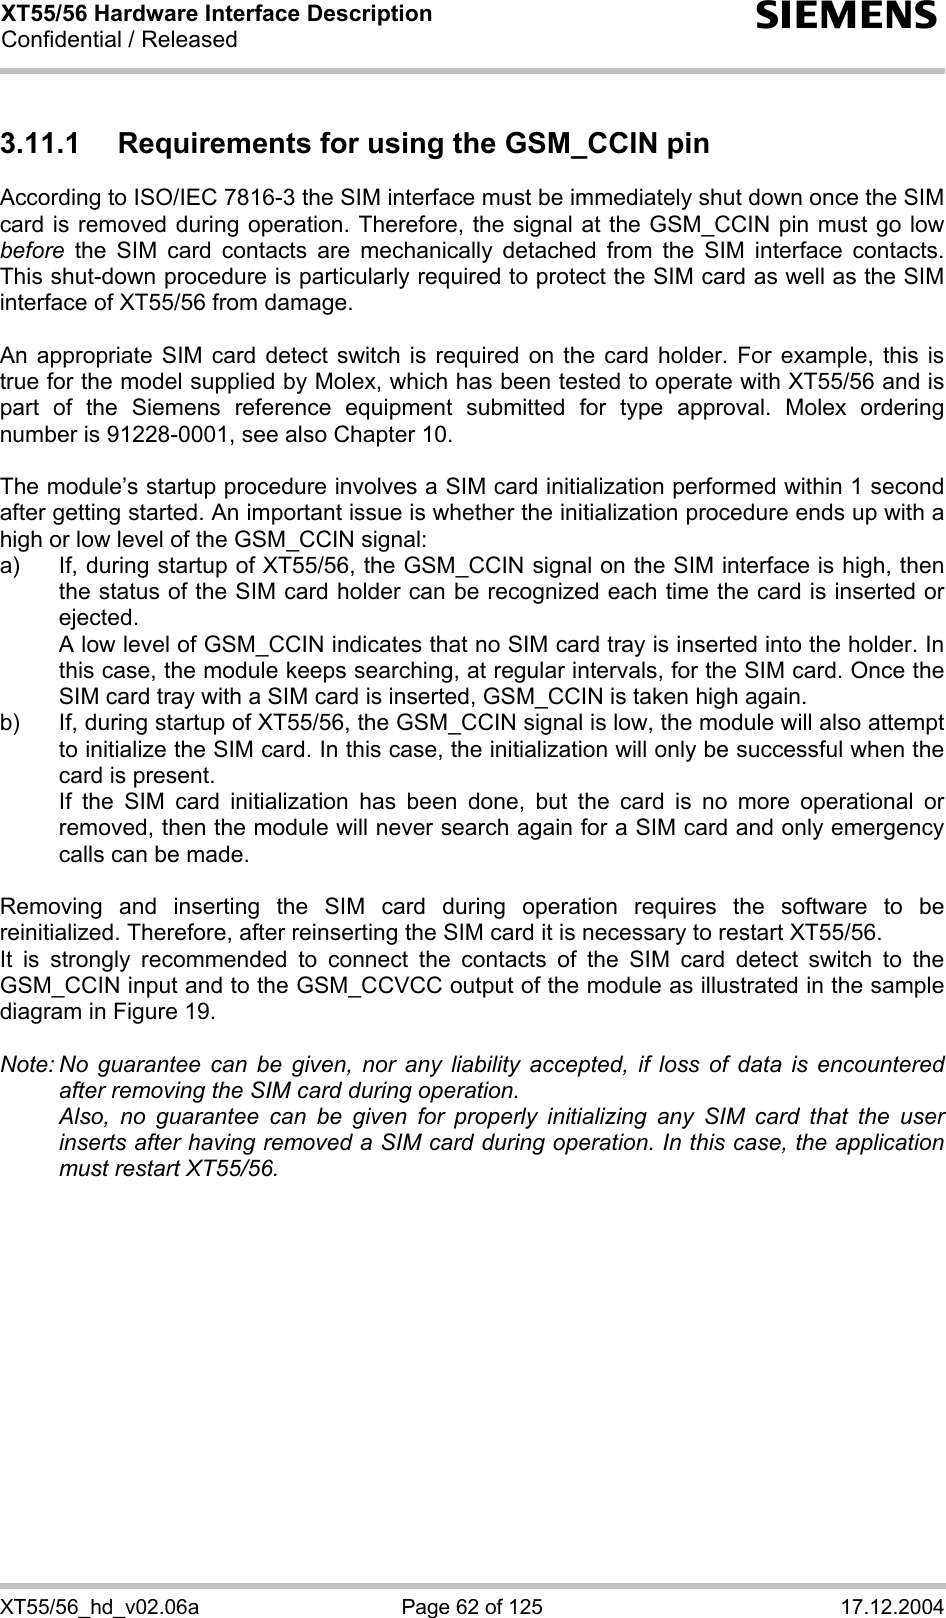 XT55/56 Hardware Interface Description Confidential / Released s XT55/56_hd_v02.06a  Page 62 of 125  17.12.2004 3.11.1  Requirements for using the GSM_CCIN pin According to ISO/IEC 7816-3 the SIM interface must be immediately shut down once the SIM card is removed during operation. Therefore, the signal at the GSM_CCIN pin must go low before the SIM card contacts are mechanically detached from the SIM interface contacts. This shut-down procedure is particularly required to protect the SIM card as well as the SIM interface of XT55/56 from damage.  An appropriate SIM card detect switch is required on the card holder. For example, this is true for the model supplied by Molex, which has been tested to operate with XT55/56 and is part of the Siemens reference equipment submitted for type approval. Molex ordering number is 91228-0001, see also Chapter 10.  The module’s startup procedure involves a SIM card initialization performed within 1 second after getting started. An important issue is whether the initialization procedure ends up with a high or low level of the GSM_CCIN signal: a)  If, during startup of XT55/56, the GSM_CCIN signal on the SIM interface is high, then the status of the SIM card holder can be recognized each time the card is inserted or ejected.    A low level of GSM_CCIN indicates that no SIM card tray is inserted into the holder. In this case, the module keeps searching, at regular intervals, for the SIM card. Once the SIM card tray with a SIM card is inserted, GSM_CCIN is taken high again. b)  If, during startup of XT55/56, the GSM_CCIN signal is low, the module will also attempt to initialize the SIM card. In this case, the initialization will only be successful when the card is present.    If the SIM card initialization has been done, but the card is no more operational or removed, then the module will never search again for a SIM card and only emergency calls can be made.  Removing and inserting the SIM card during operation requires the software to be reinitialized. Therefore, after reinserting the SIM card it is necessary to restart XT55/56.  It is strongly recommended to connect the contacts of the SIM card detect switch to the GSM_CCIN input and to the GSM_CCVCC output of the module as illustrated in the sample diagram in Figure 19.  Note: No guarantee can be given, nor any liability accepted, if loss of data is encountered after removing the SIM card during operation.    Also, no guarantee can be given for properly initializing any SIM card that the user inserts after having removed a SIM card during operation. In this case, the application must restart XT55/56.   